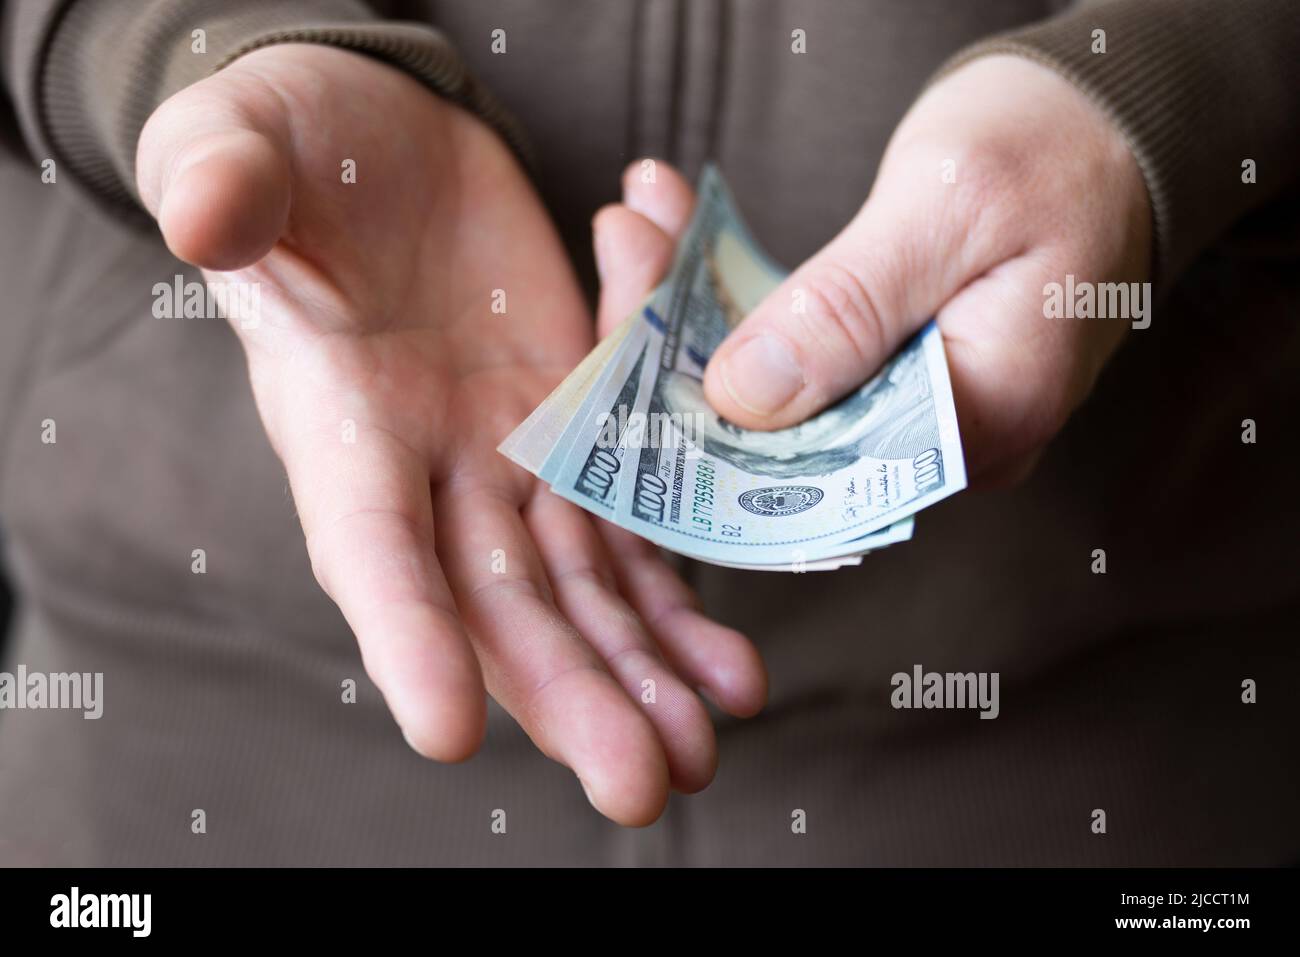 White male shows dollar bills in his hand closeup front view Stock Photo